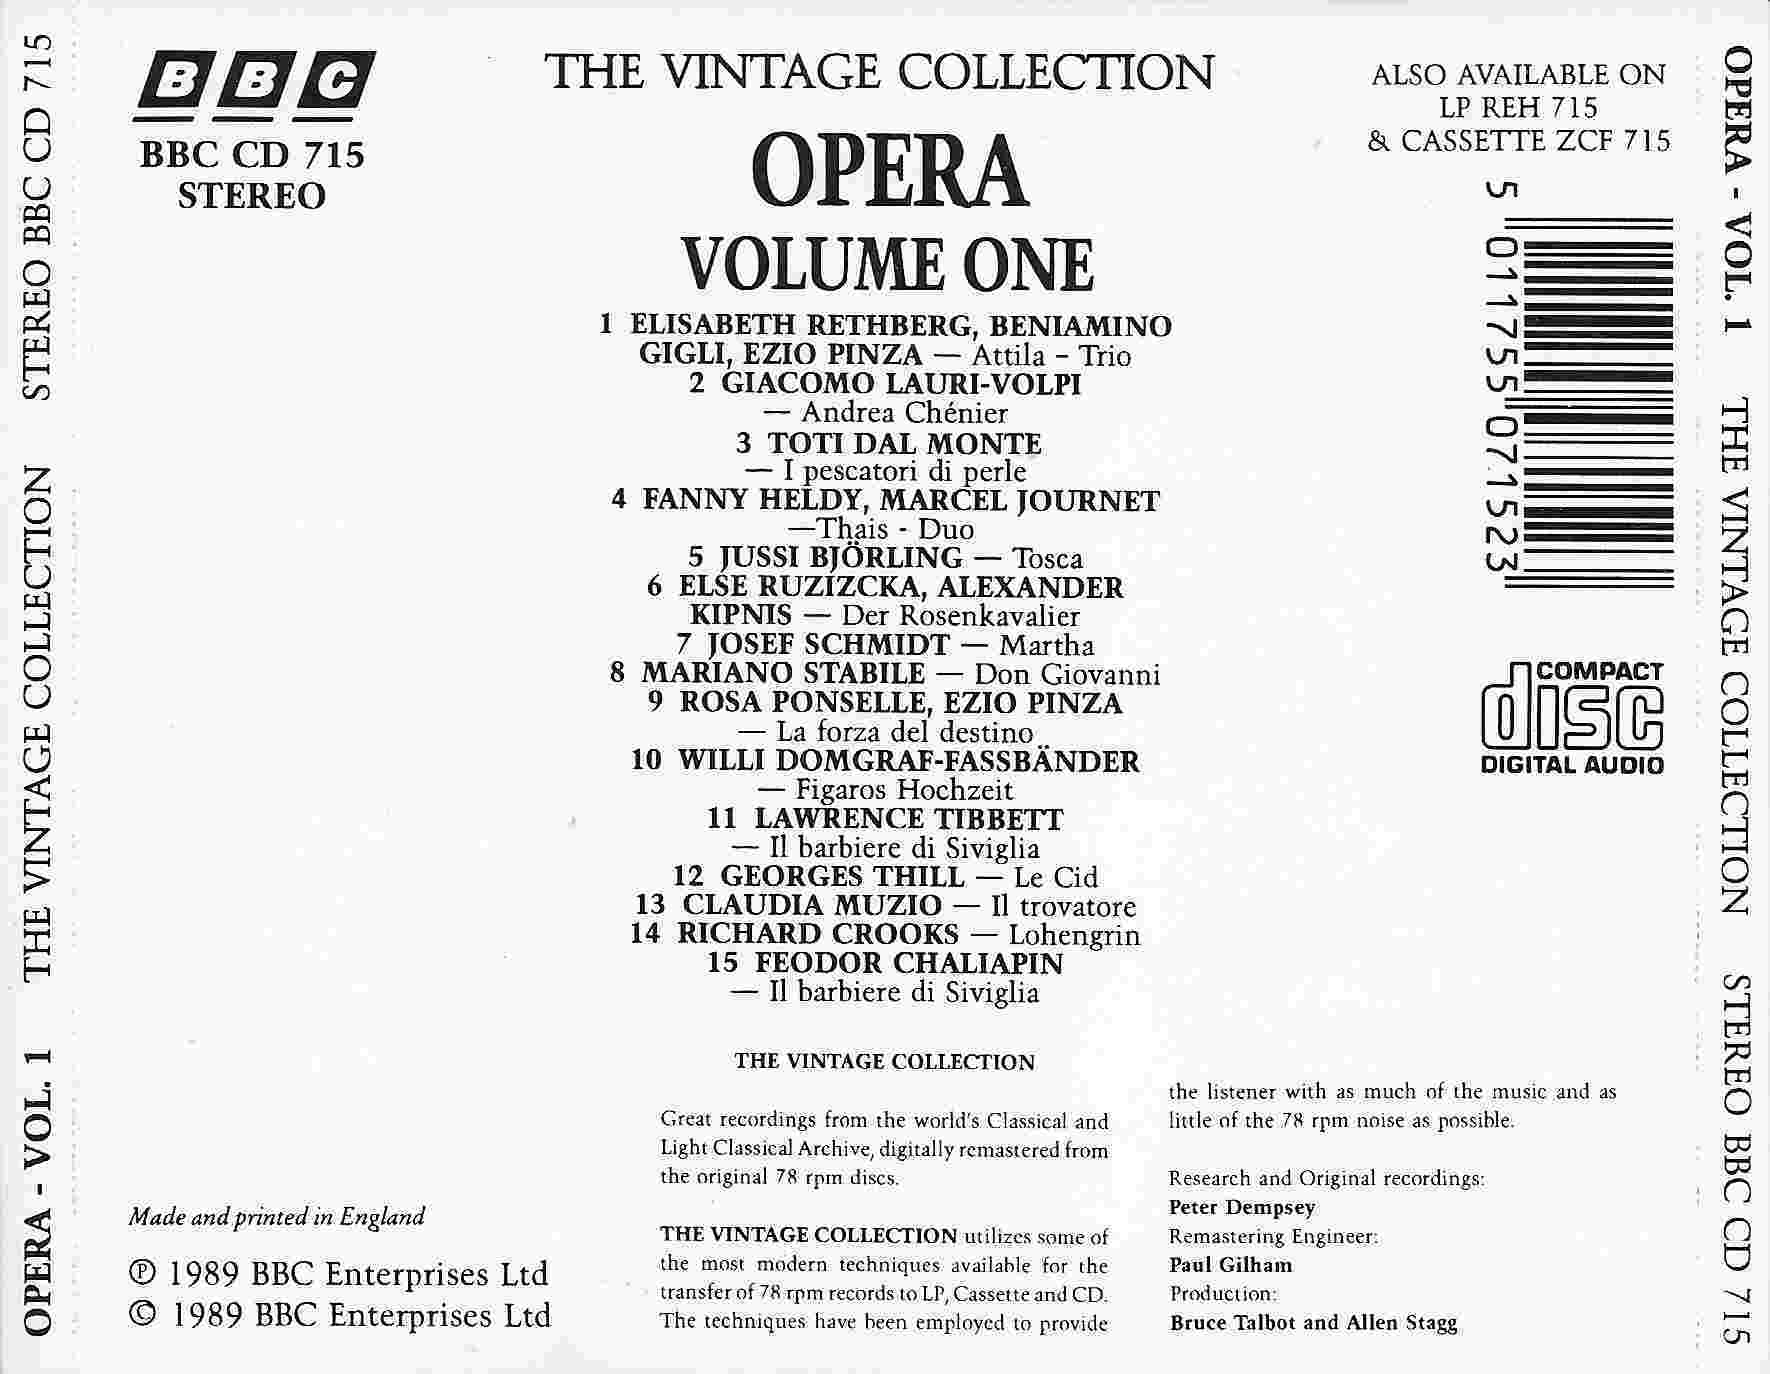 Picture of BBCCD715 The vintage collection - Opera by artist Various from the BBC records and Tapes library